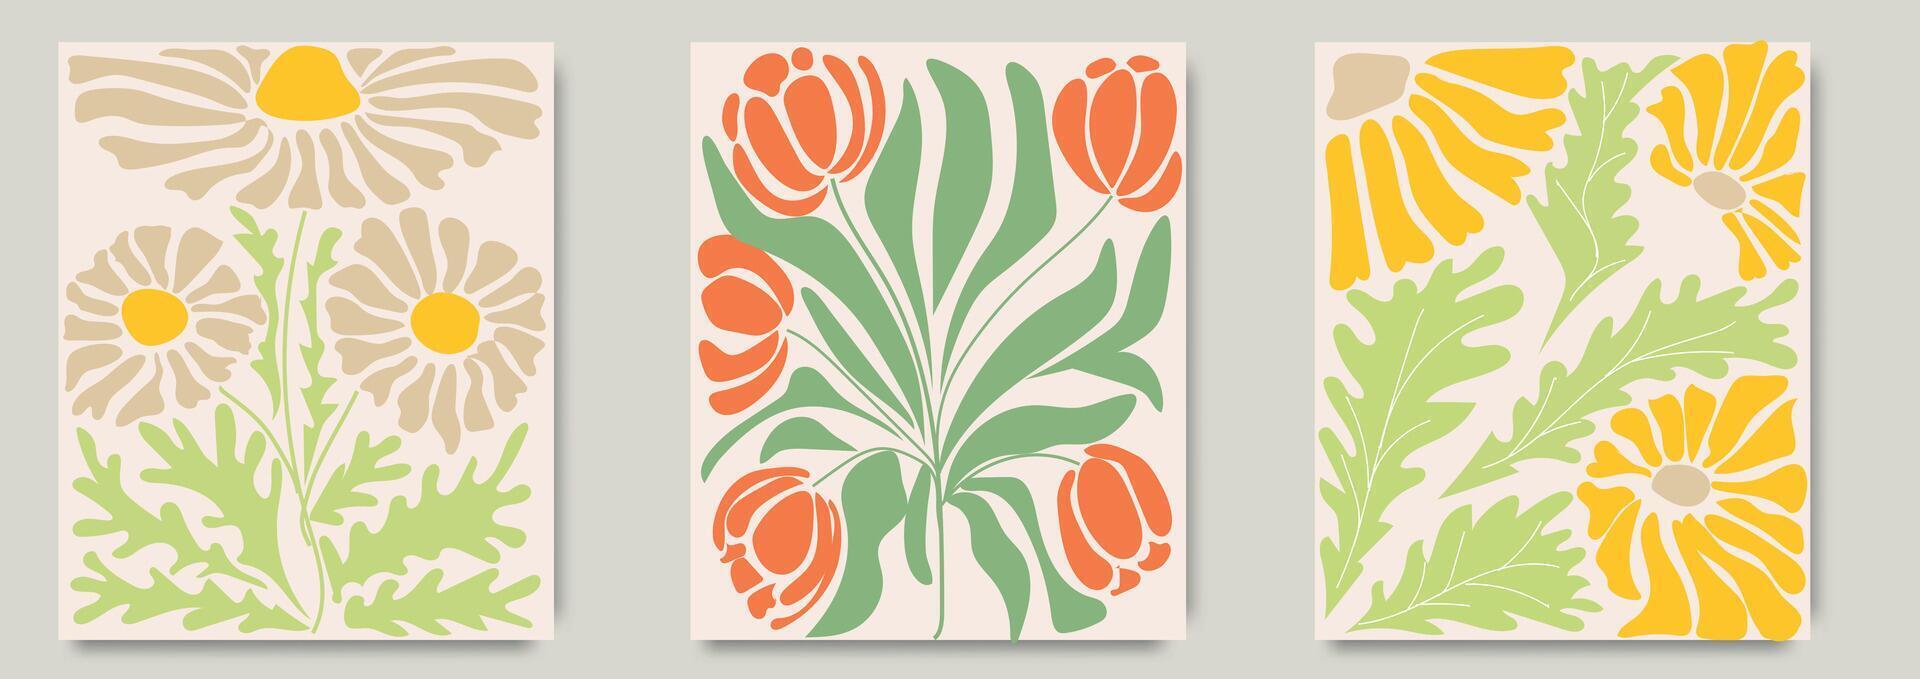 Trendy floral retro posters set with flowers. Abstract blossom print in naive art style. Seventies, groovy background. Decorative contemporary botanical elements. Hippie Aesthetic. vector